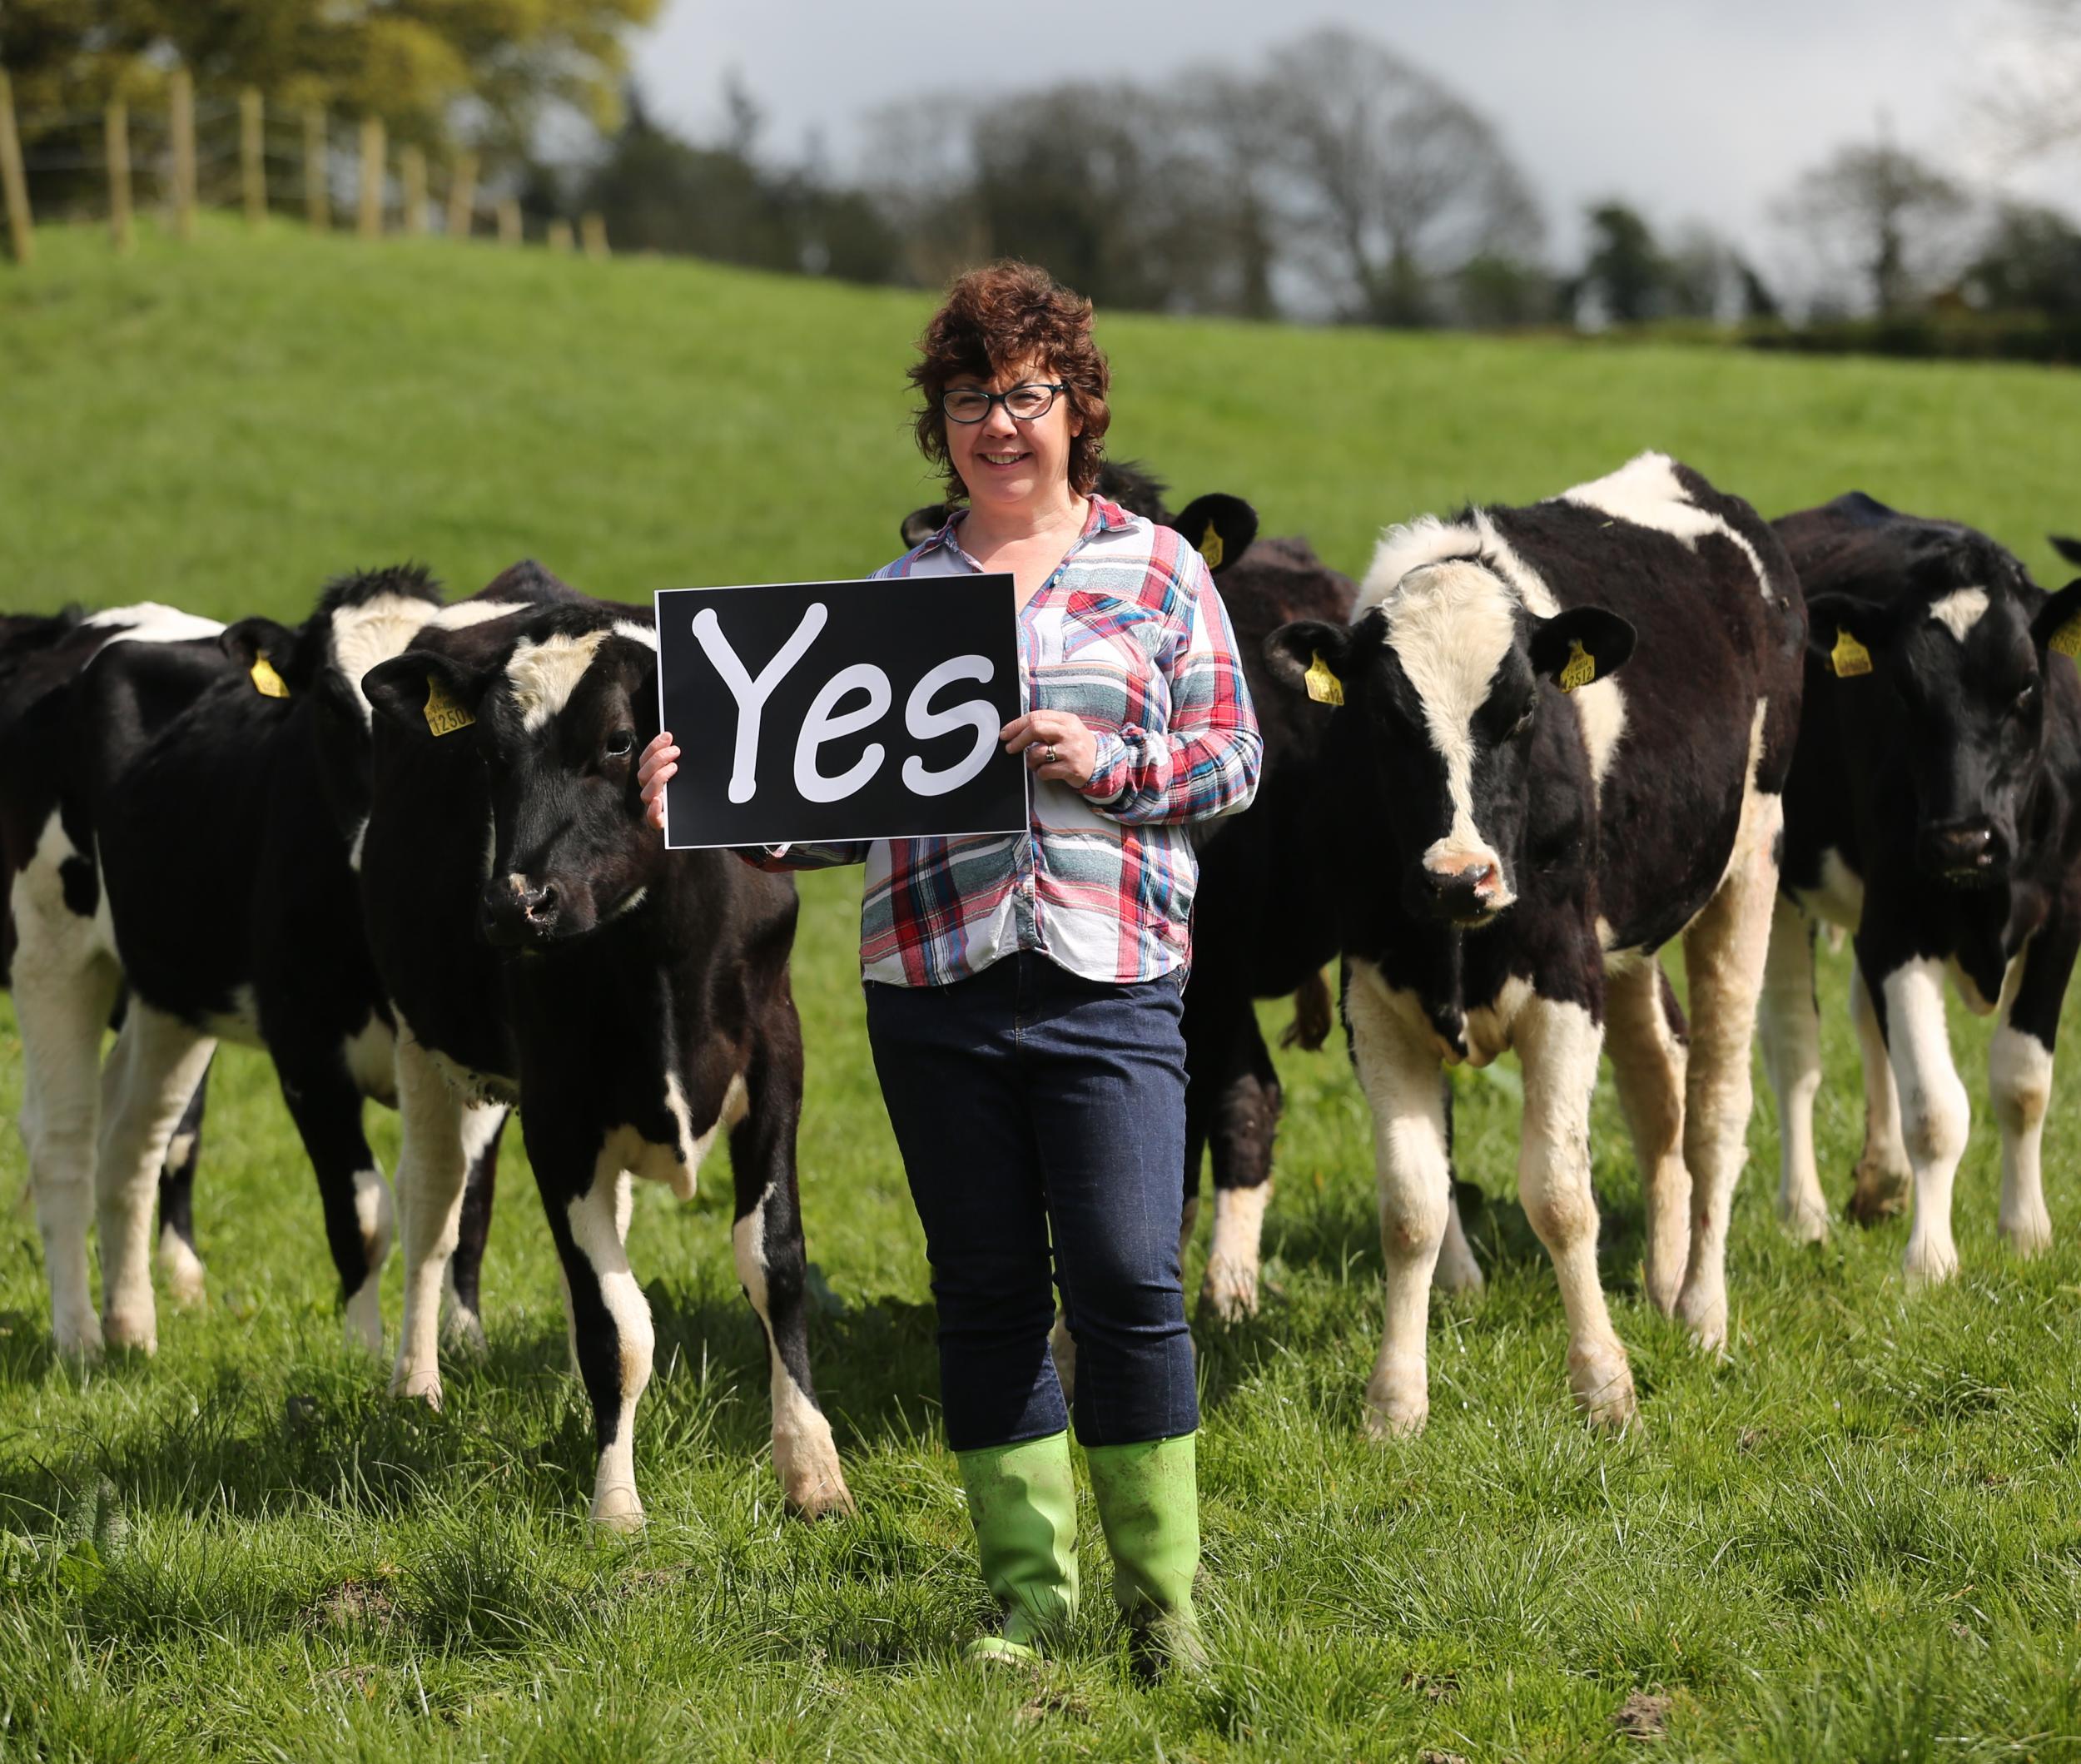 ‘Our campaign aims to show the diversity of views underlying the Yes vote in Ireland’s farming community’